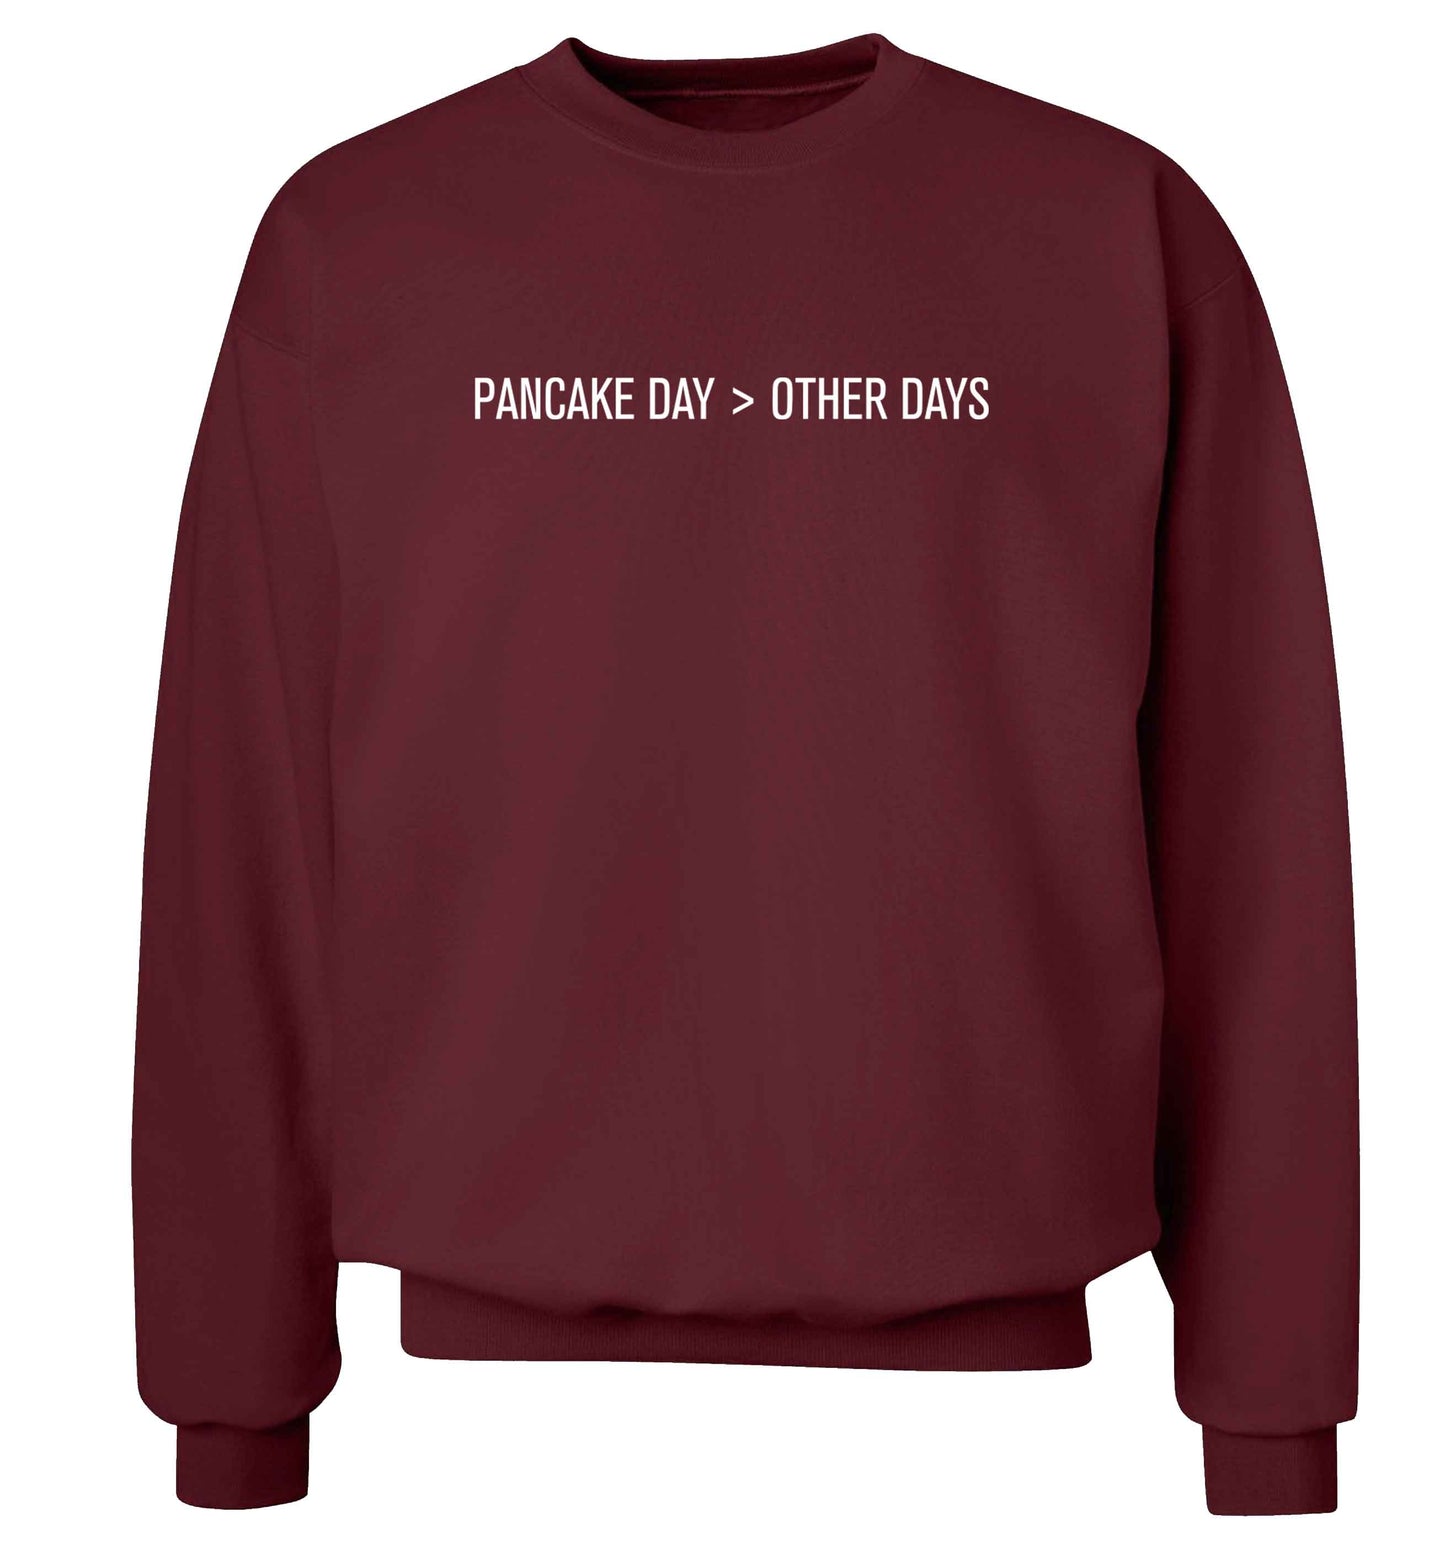 Pancake day > other days adult's unisex maroon sweater 2XL